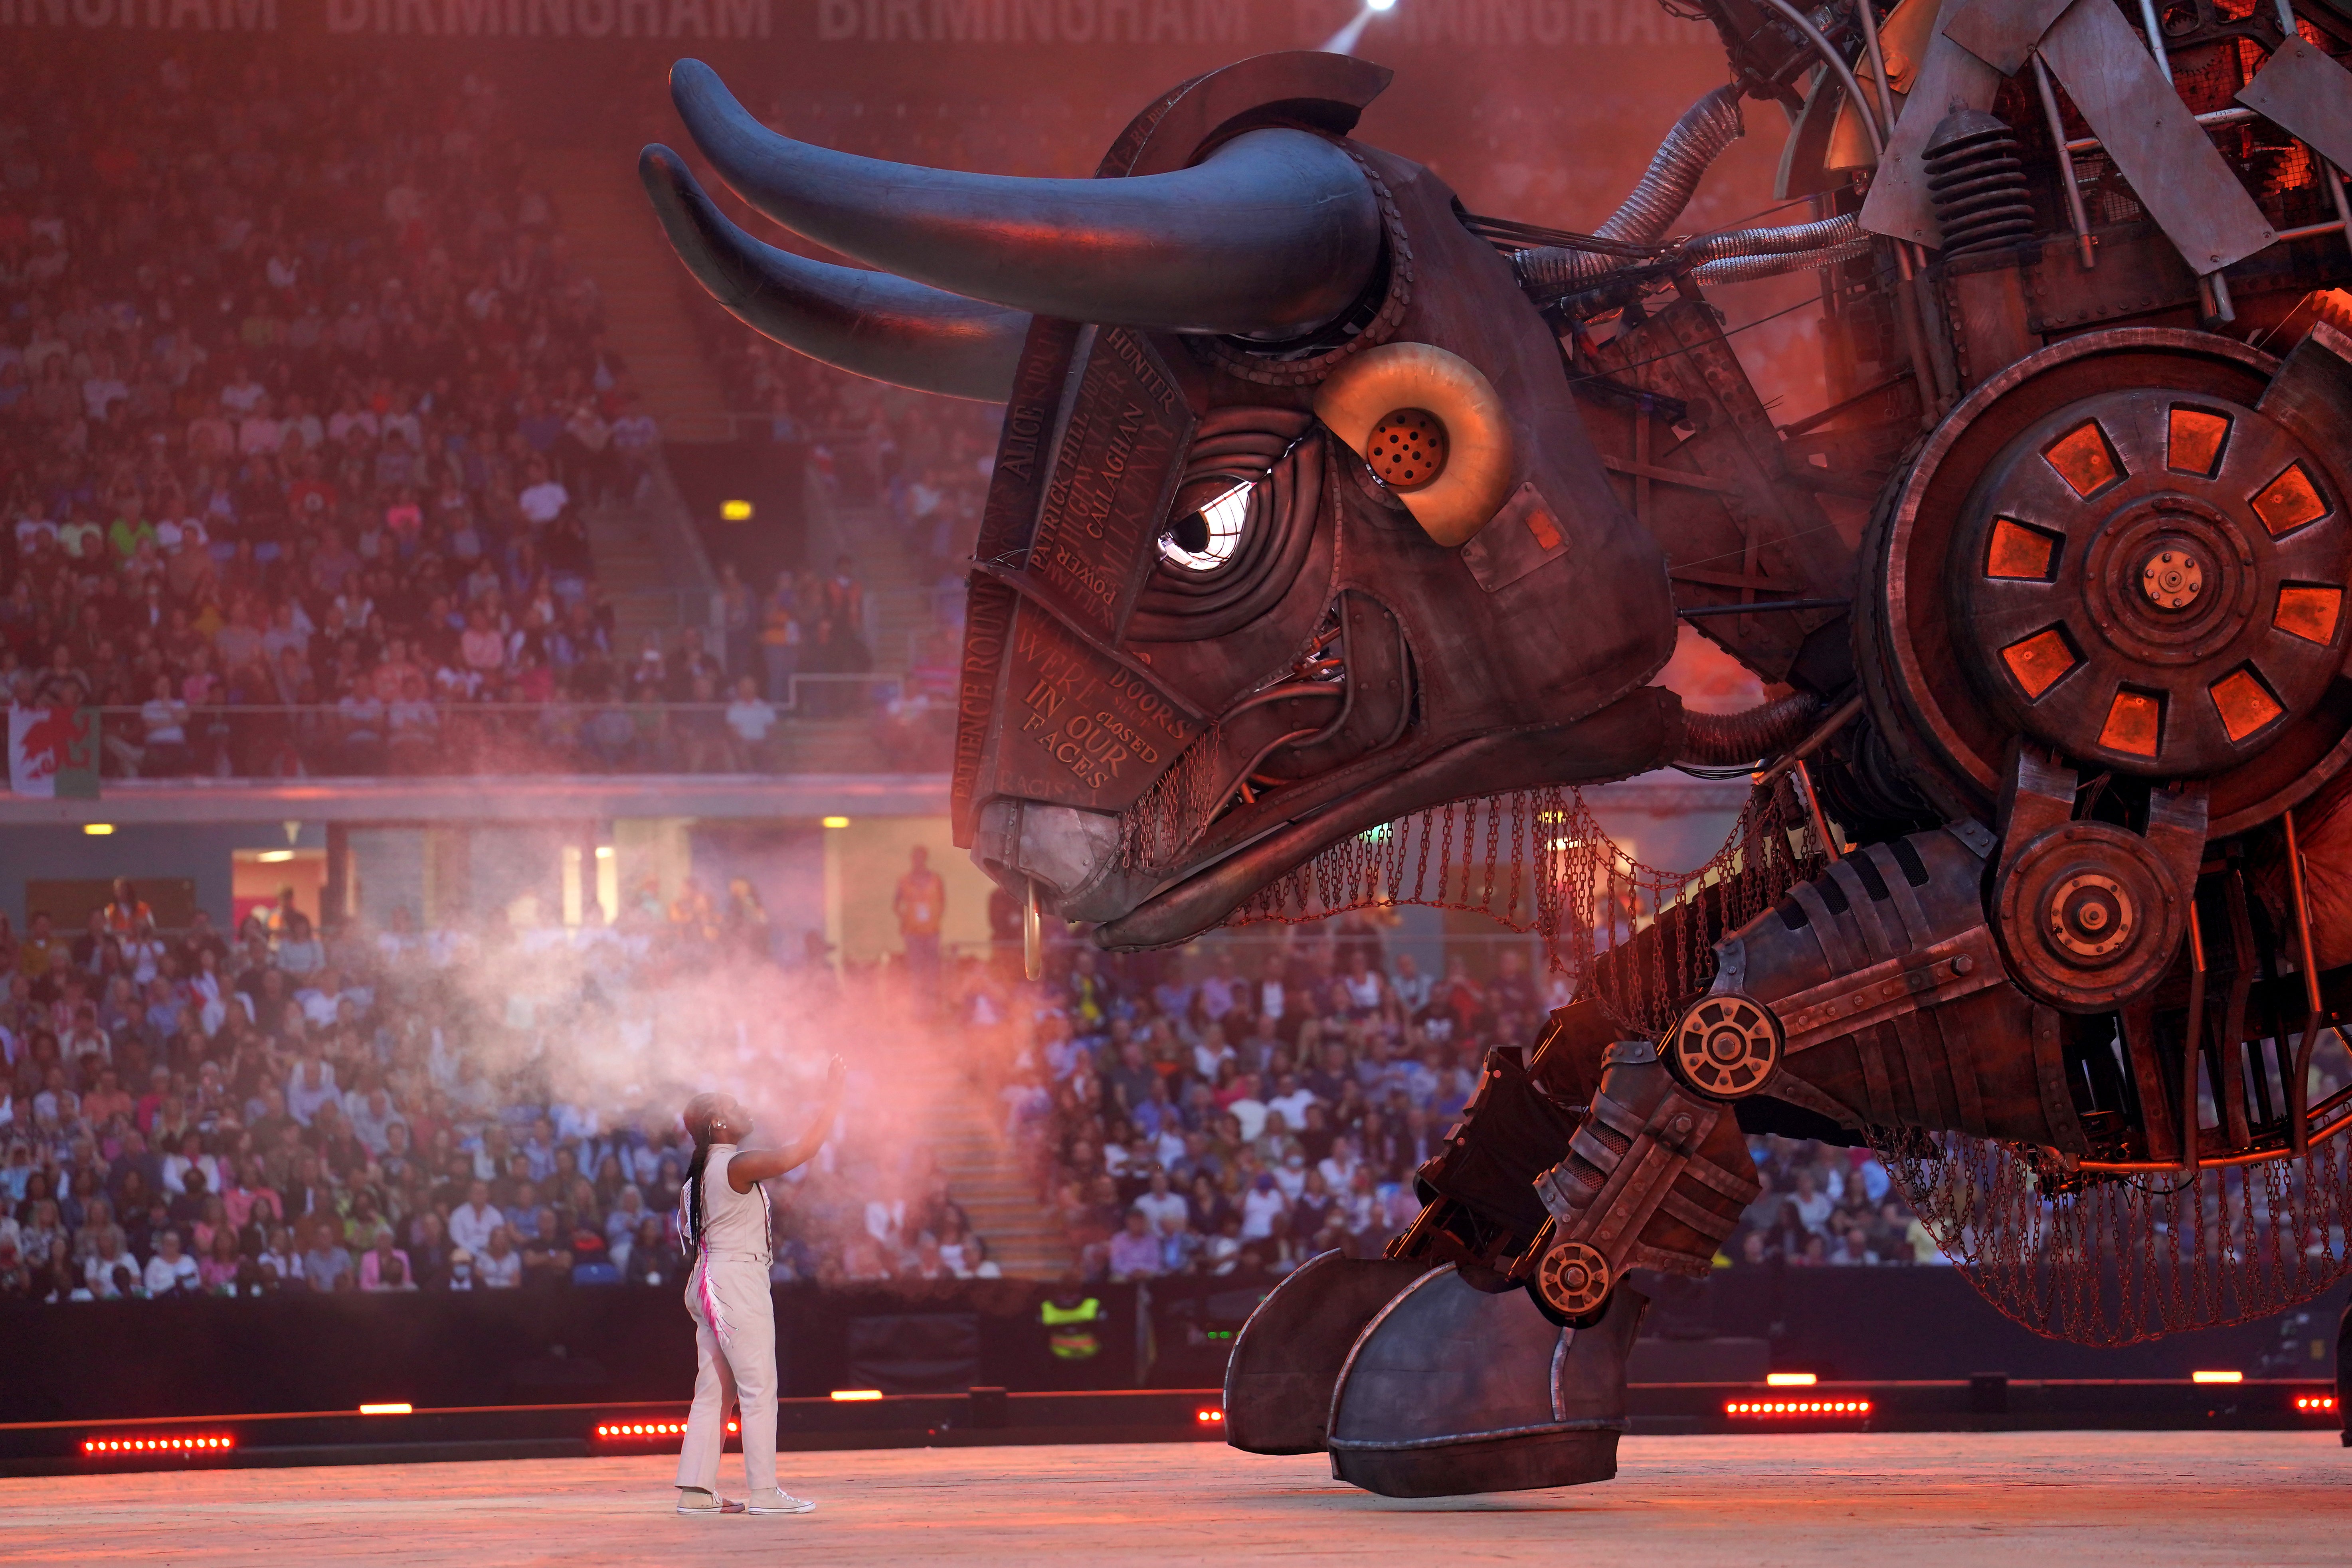 The raging bull was the centrepiece of the opening ceremony